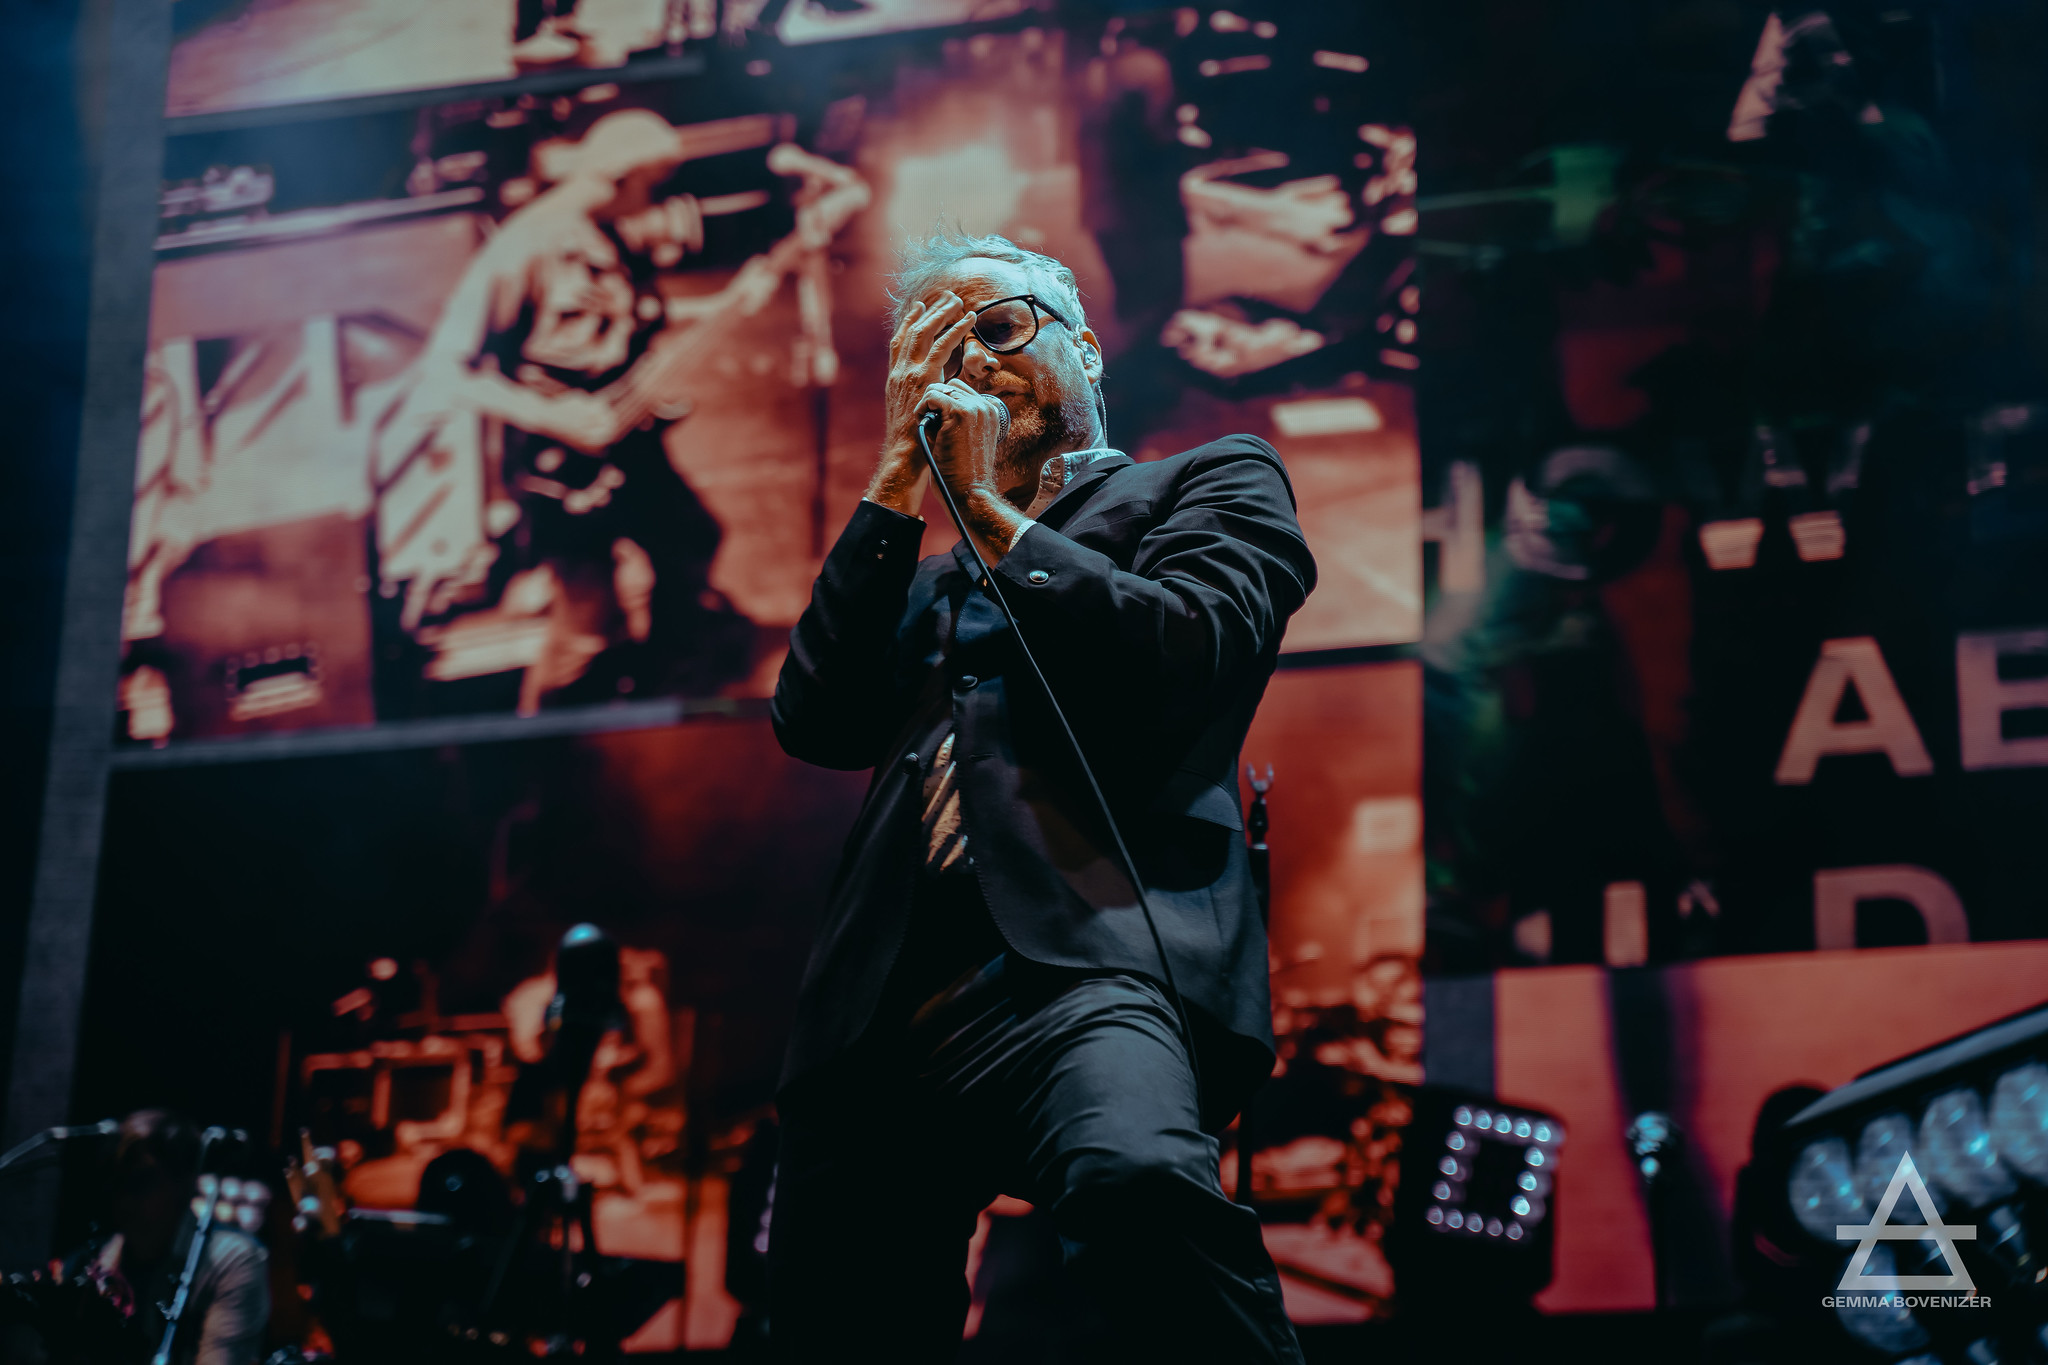 In Photos: The National at 3Arena, Dublin